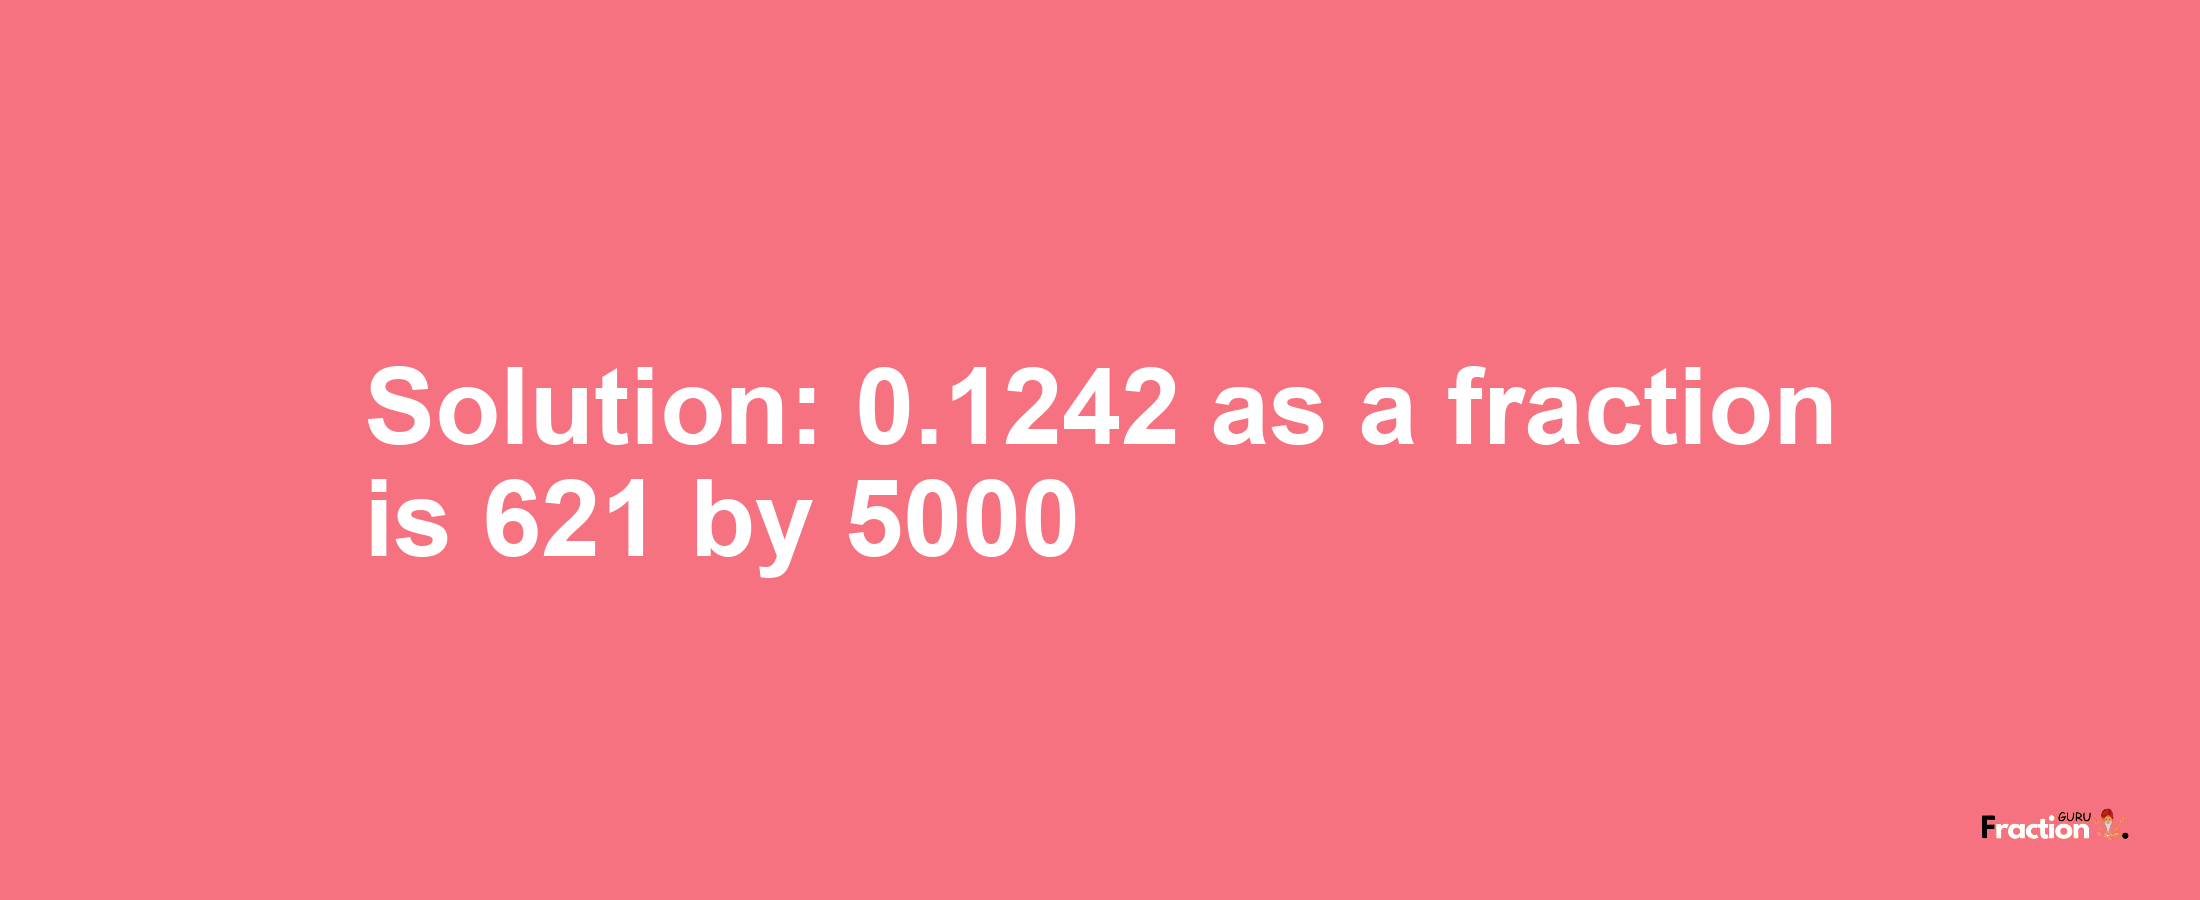 Solution:0.1242 as a fraction is 621/5000